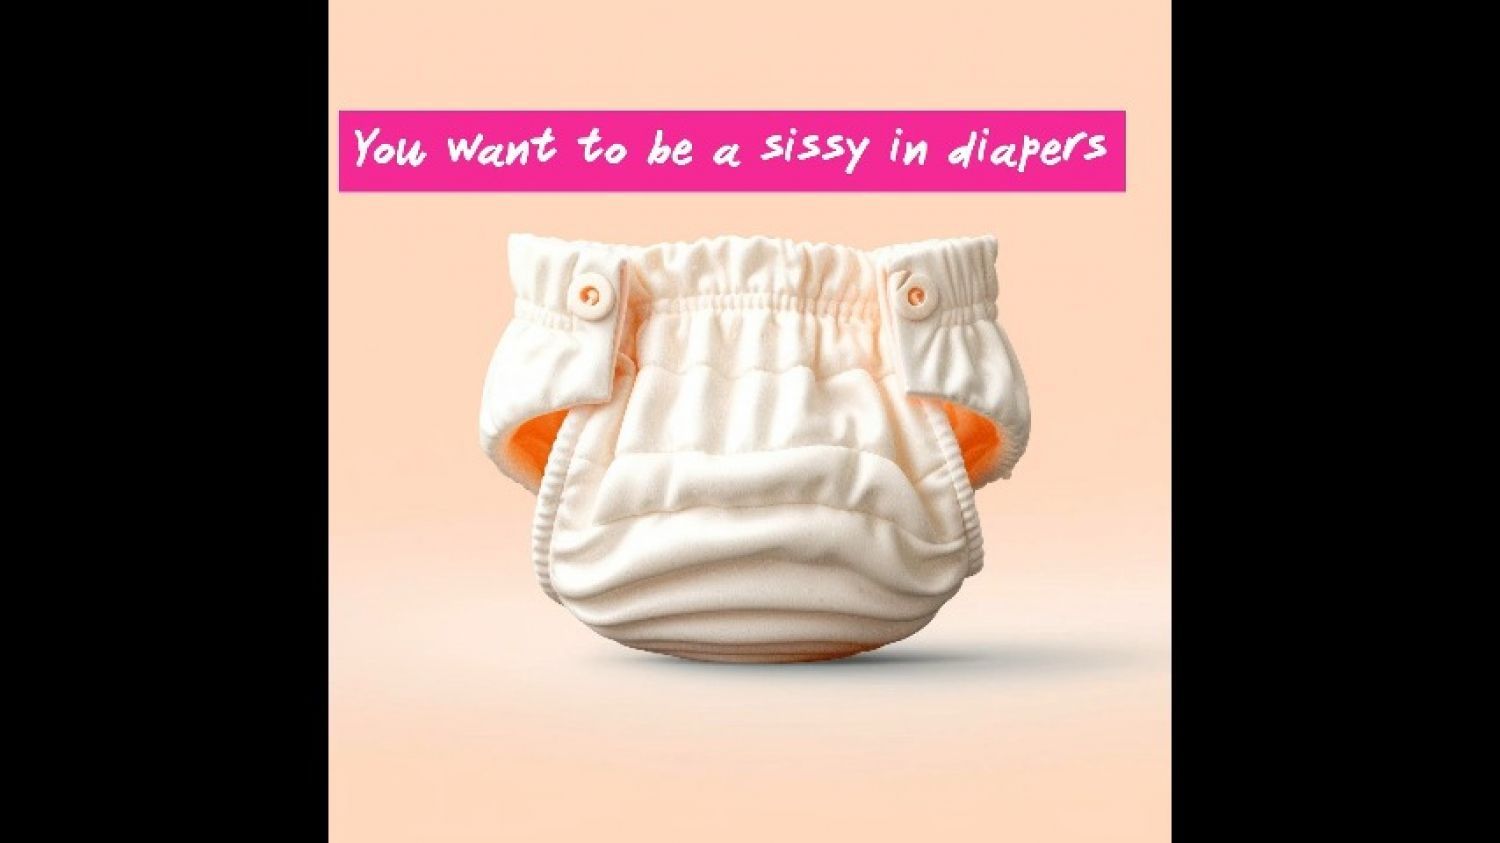 You want to be a sissy in diapers